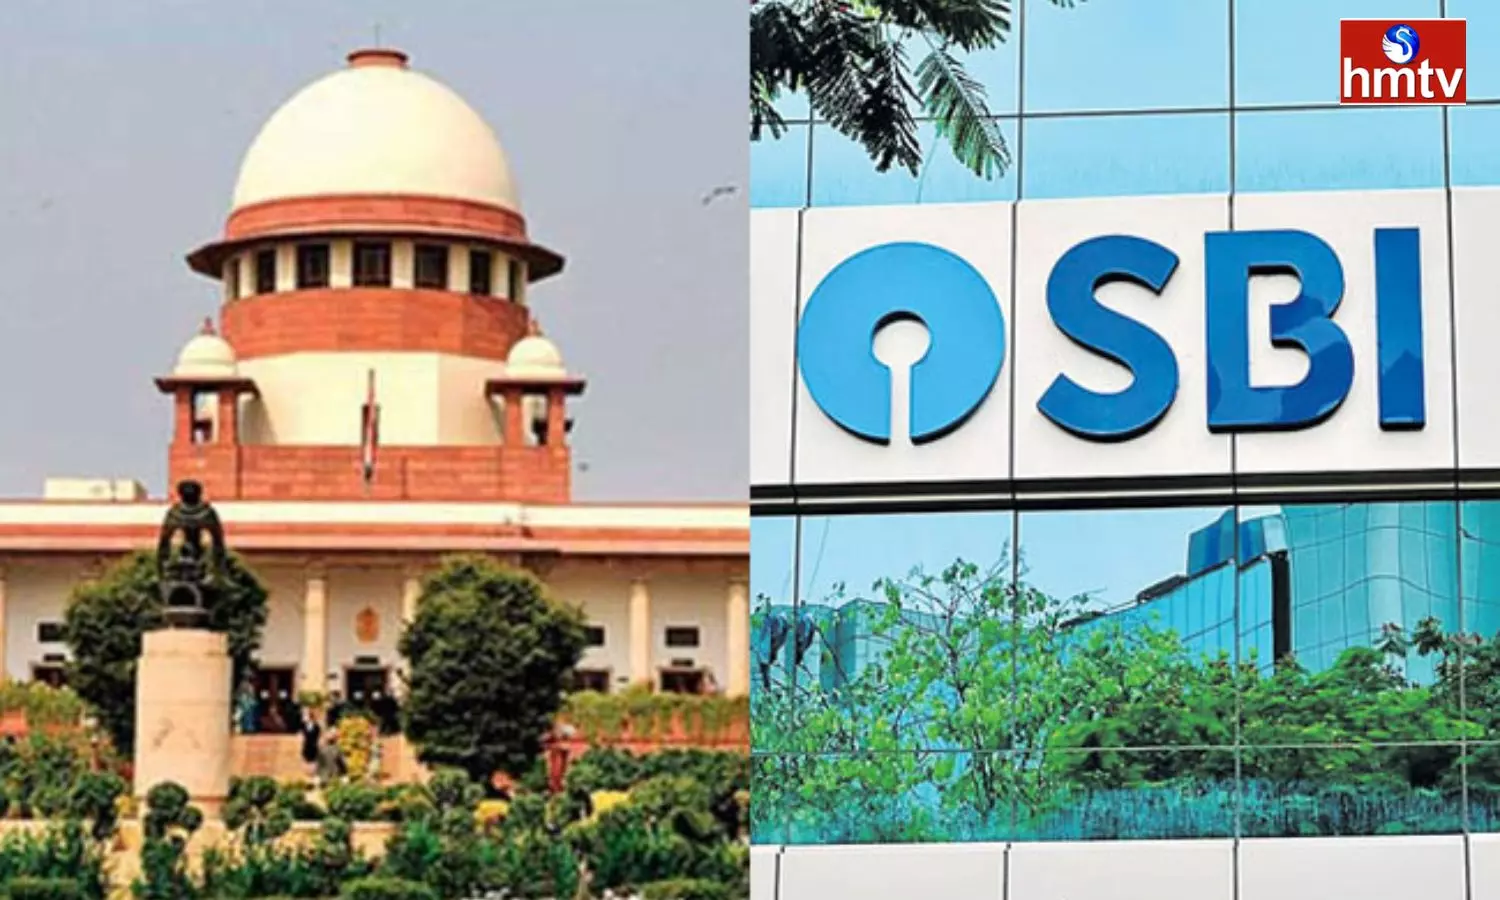 The Supreme Court asked the SBI to disclose all related details of the Electoral bonds by March 21